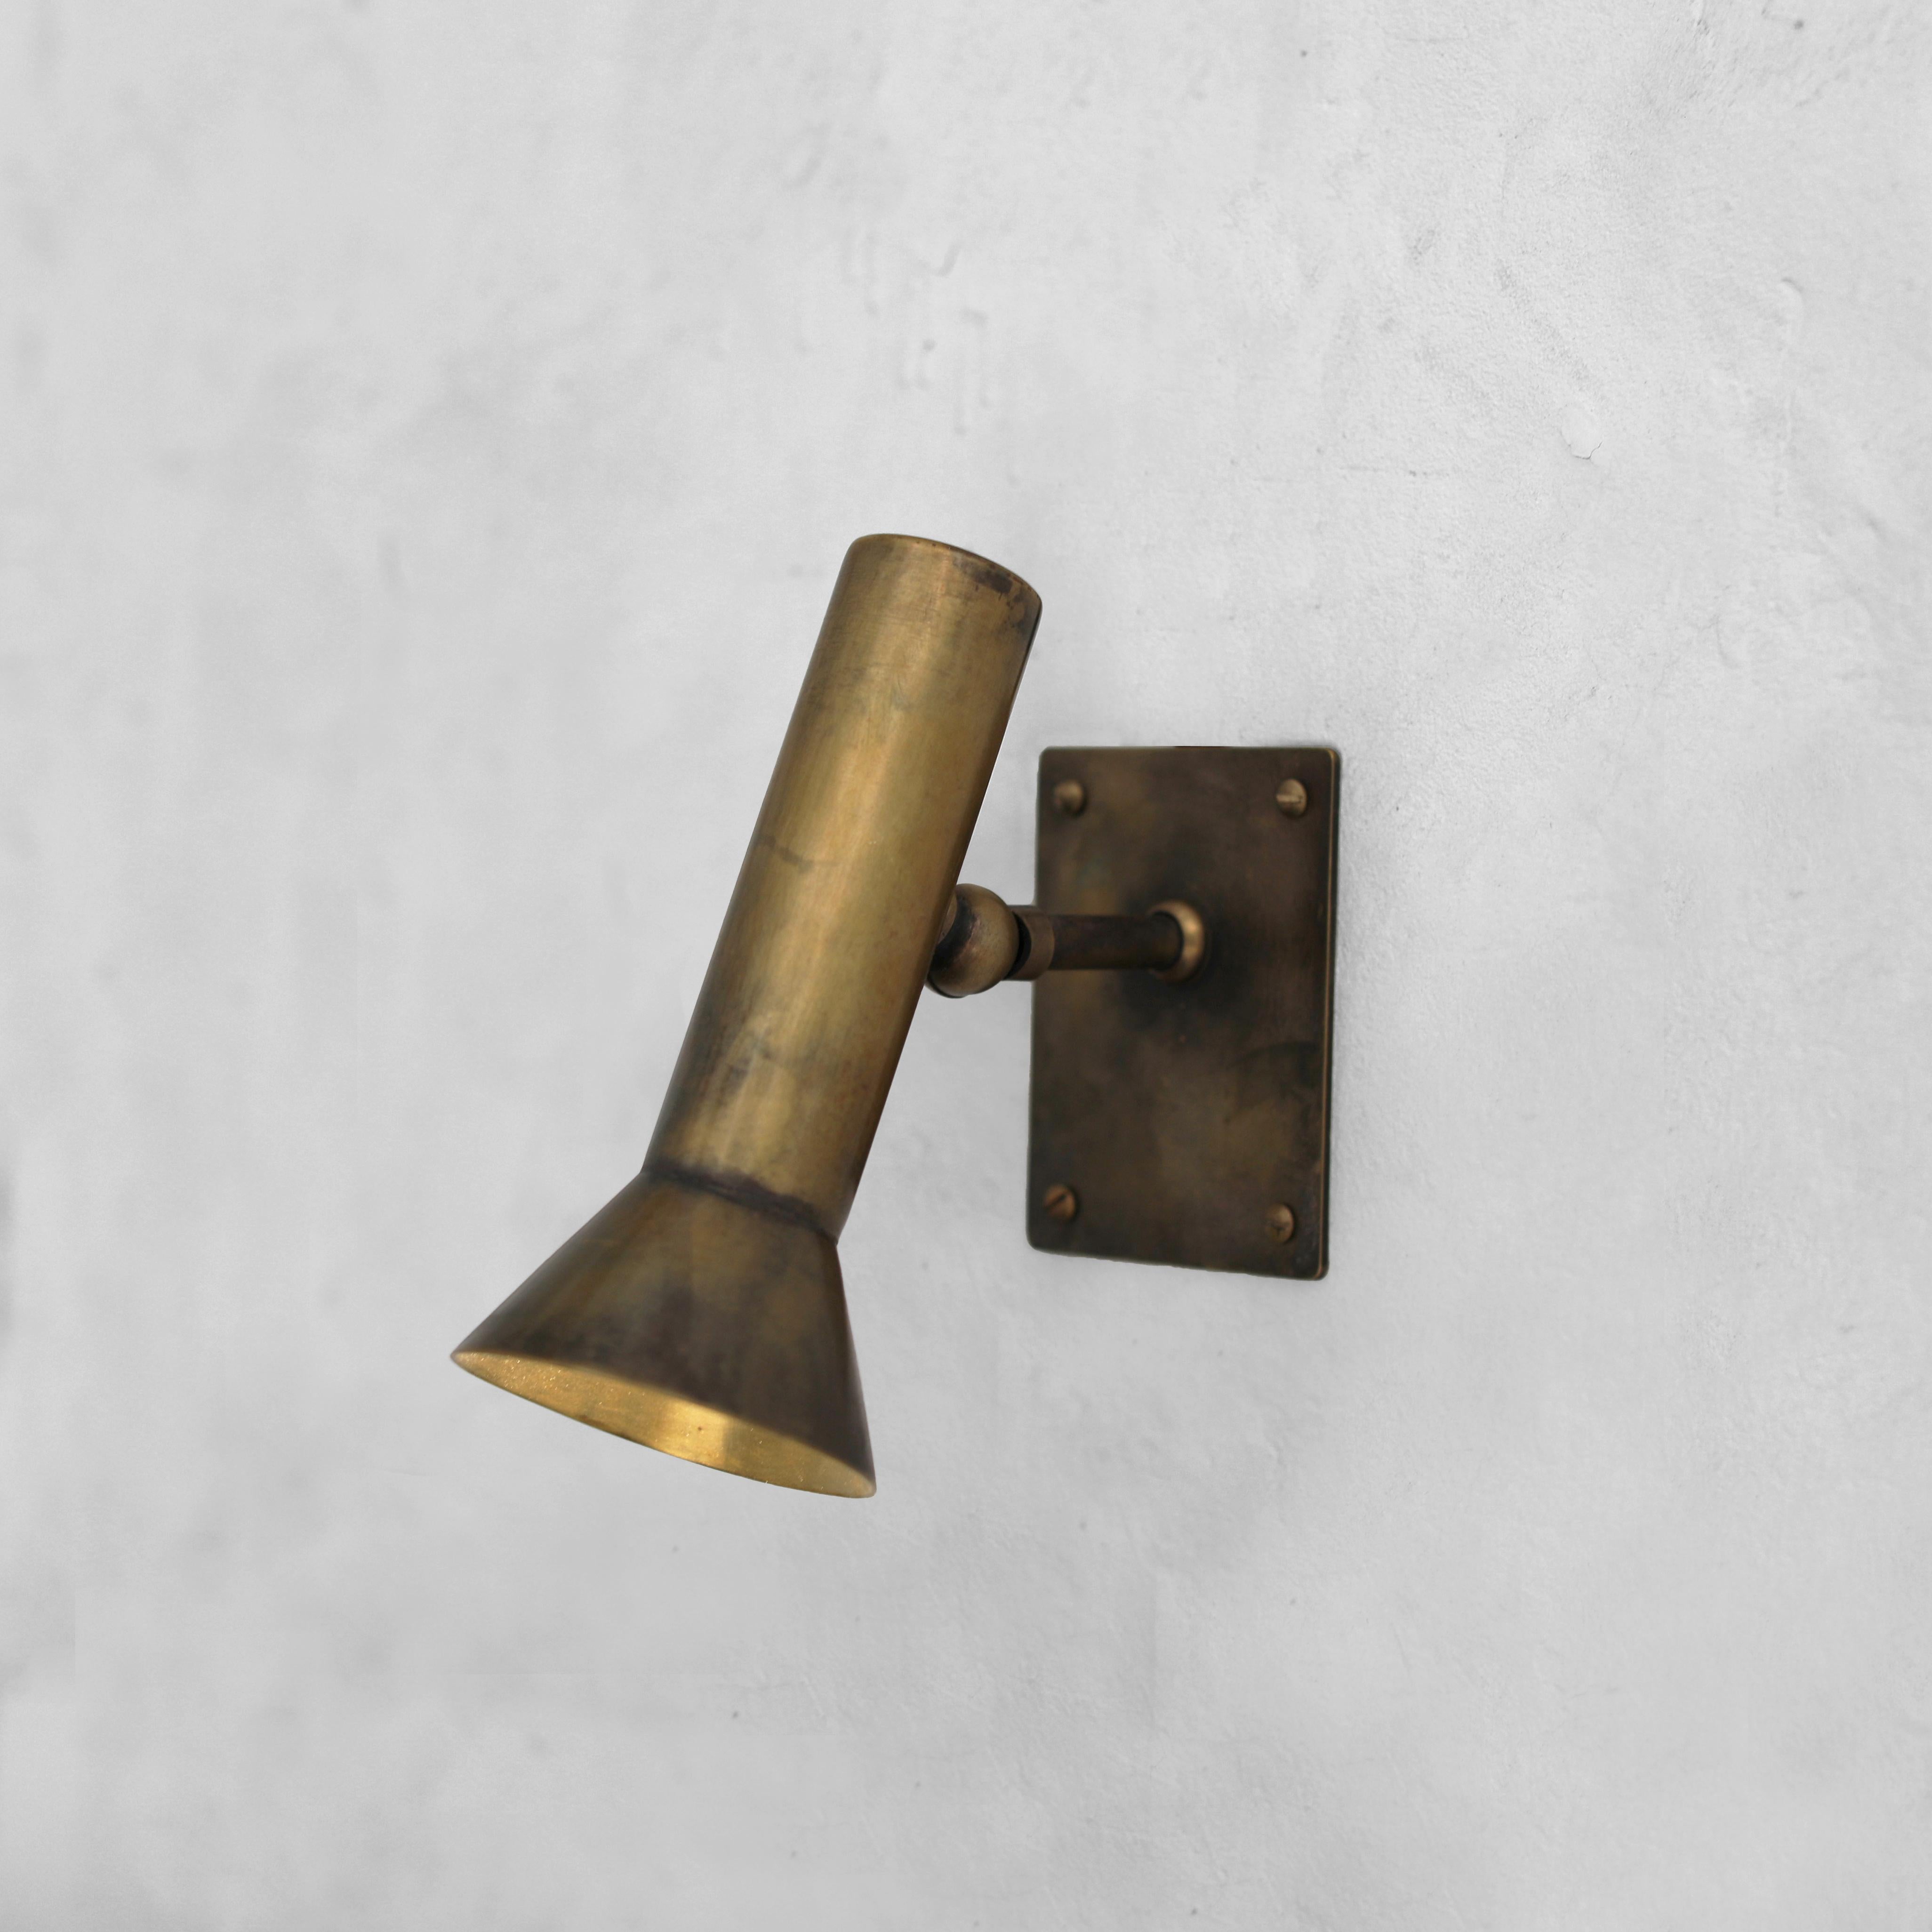 Vespera Light by WDSTCK Studio
Dimensions: 10 D x W 7 x H 15 cm
Materials: Brass,  LED

Dimmable 
Input voltage: 110V or 220V
Color temperature: 2.200-2.800K
Lumen: 240Lm
Sockets: GU10

Exploring the balance between art and design, we aim to bring